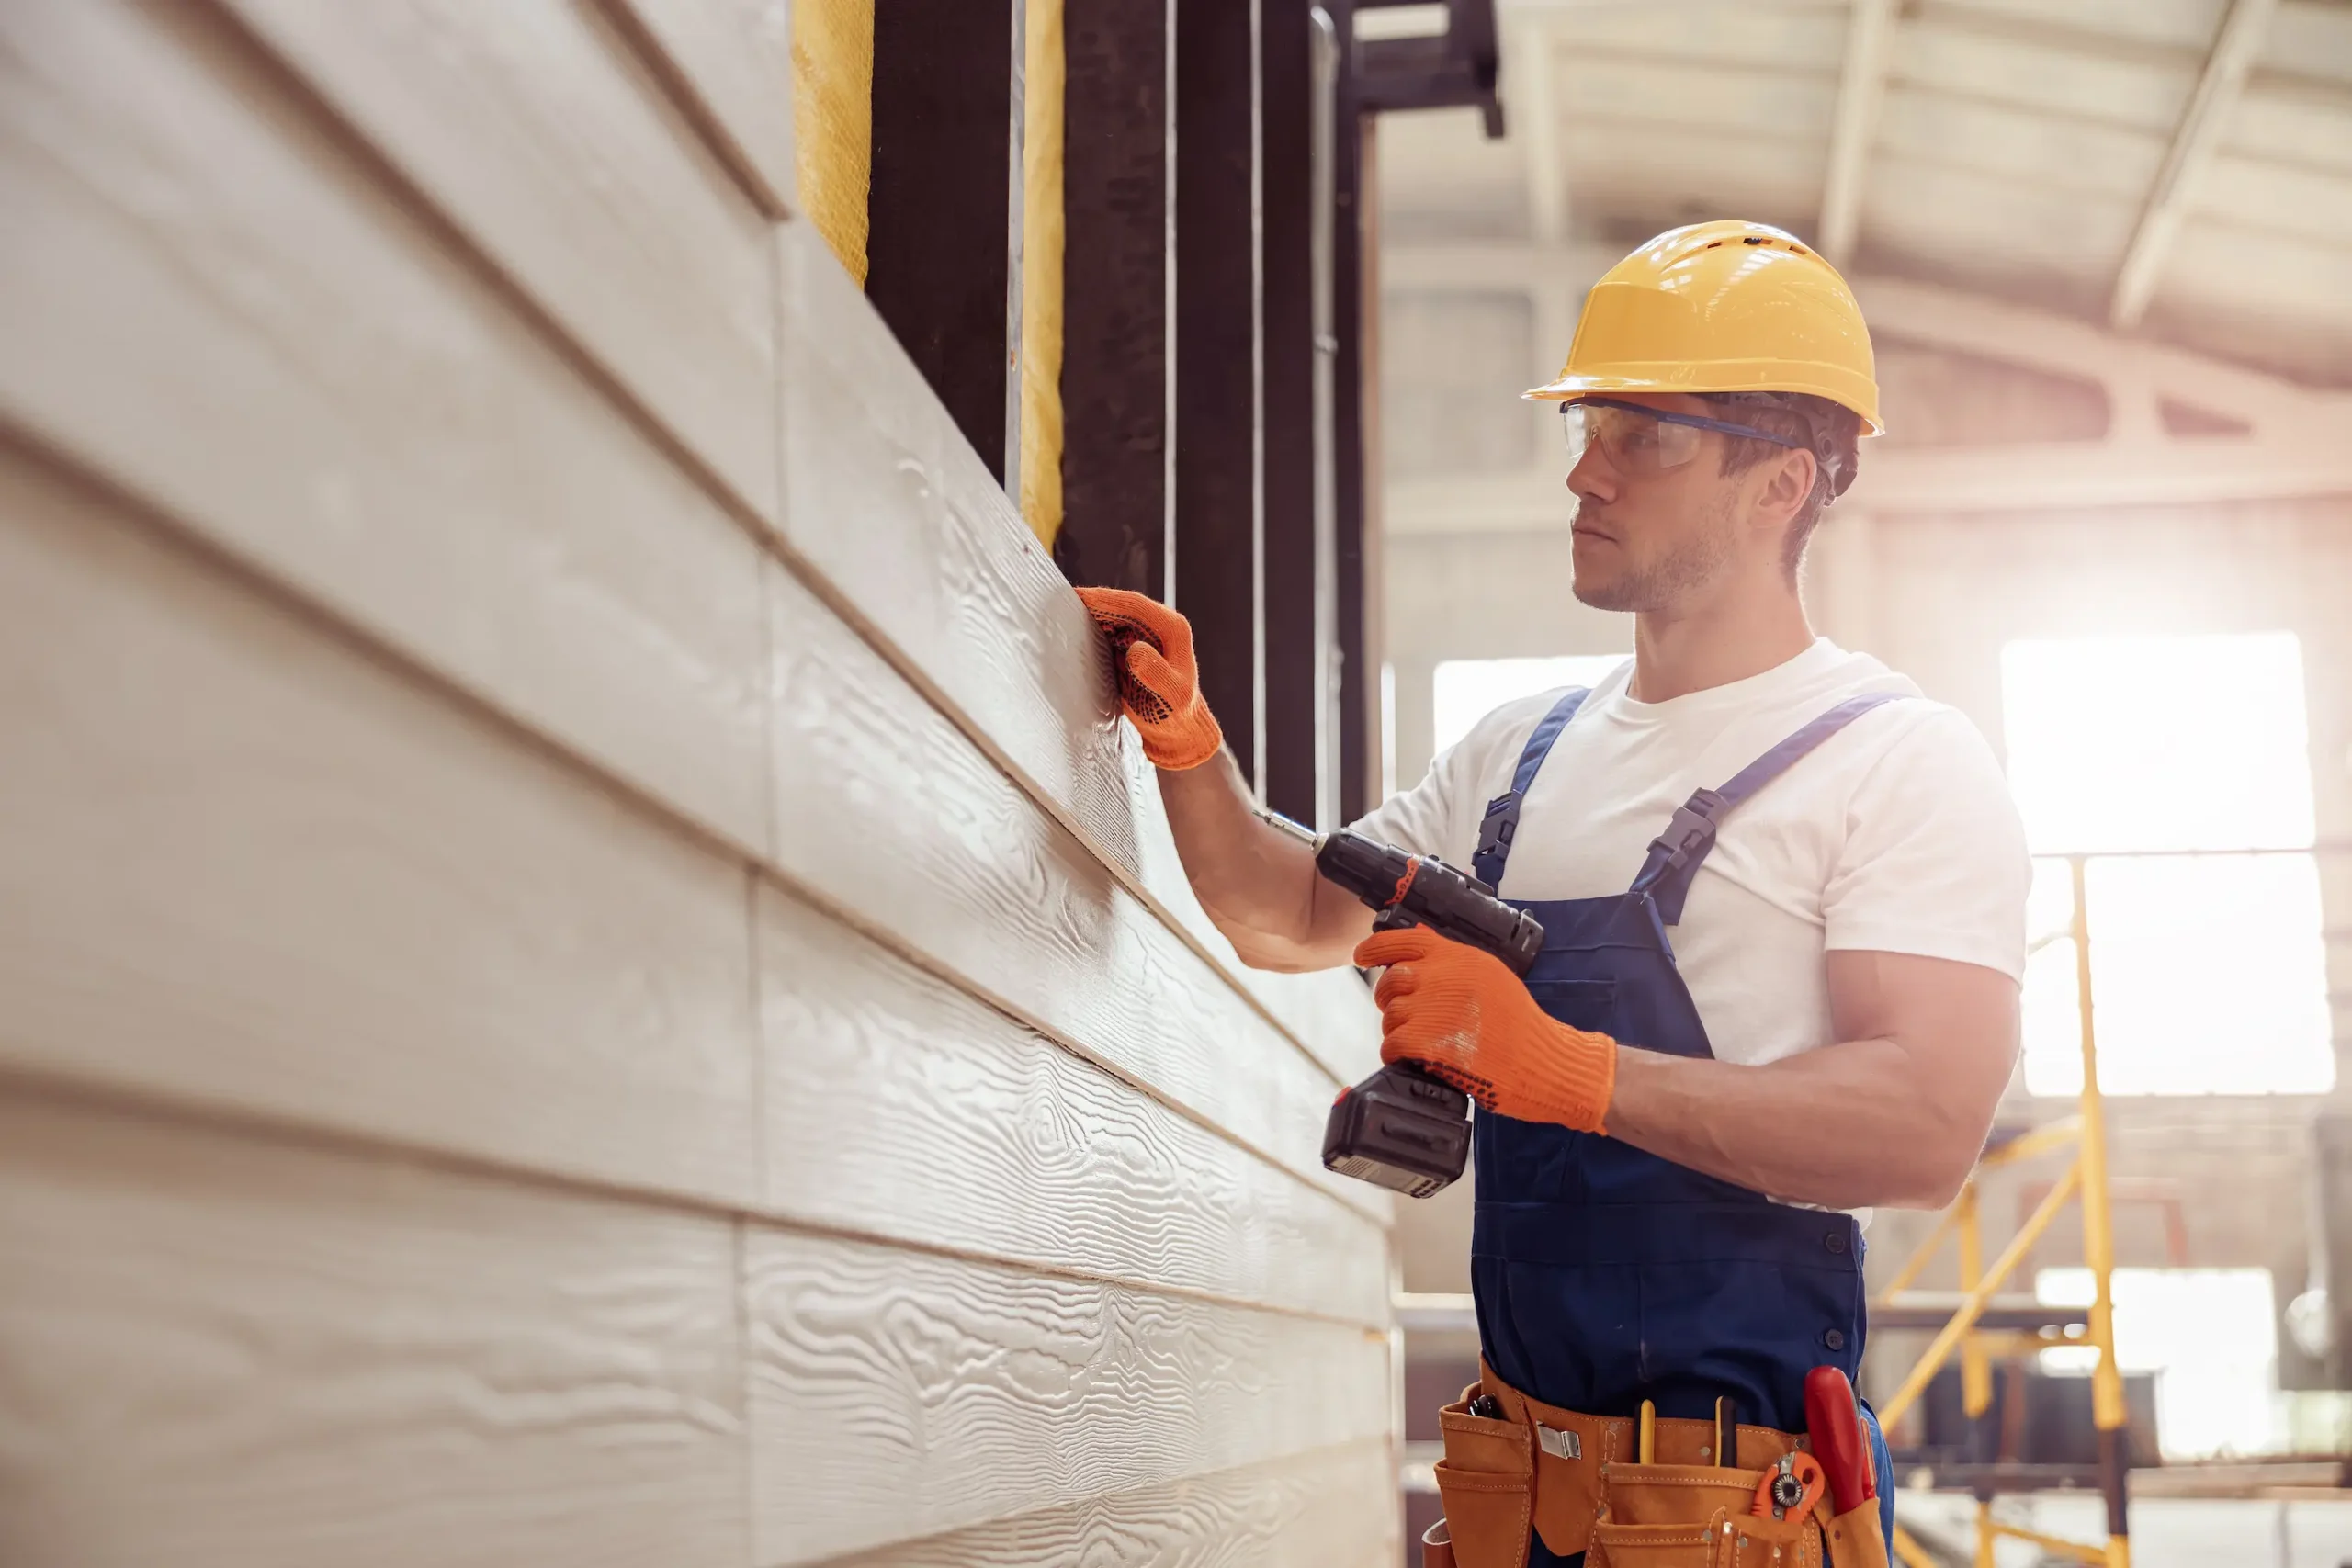 Things to Consider When Looking for an Oklahoma Siding Company